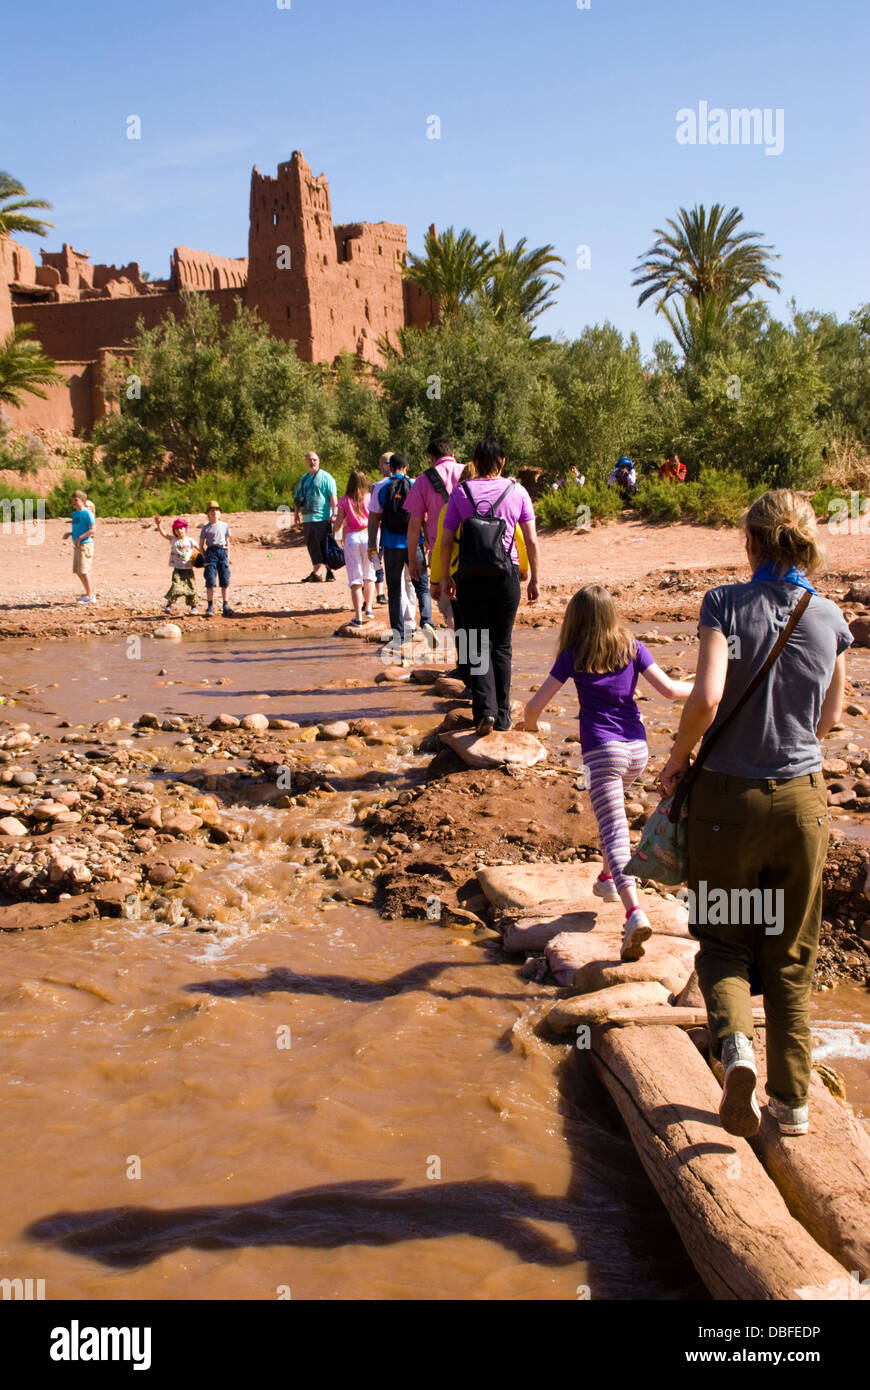 Aït Benhaddou in Berber Ath Benhadu Morocco. Tourists cross the Ounila River. Most of the town's inhabitants now live in a more modern village at the other side of the river; however, eight families still live within the ksar. Stock Photo